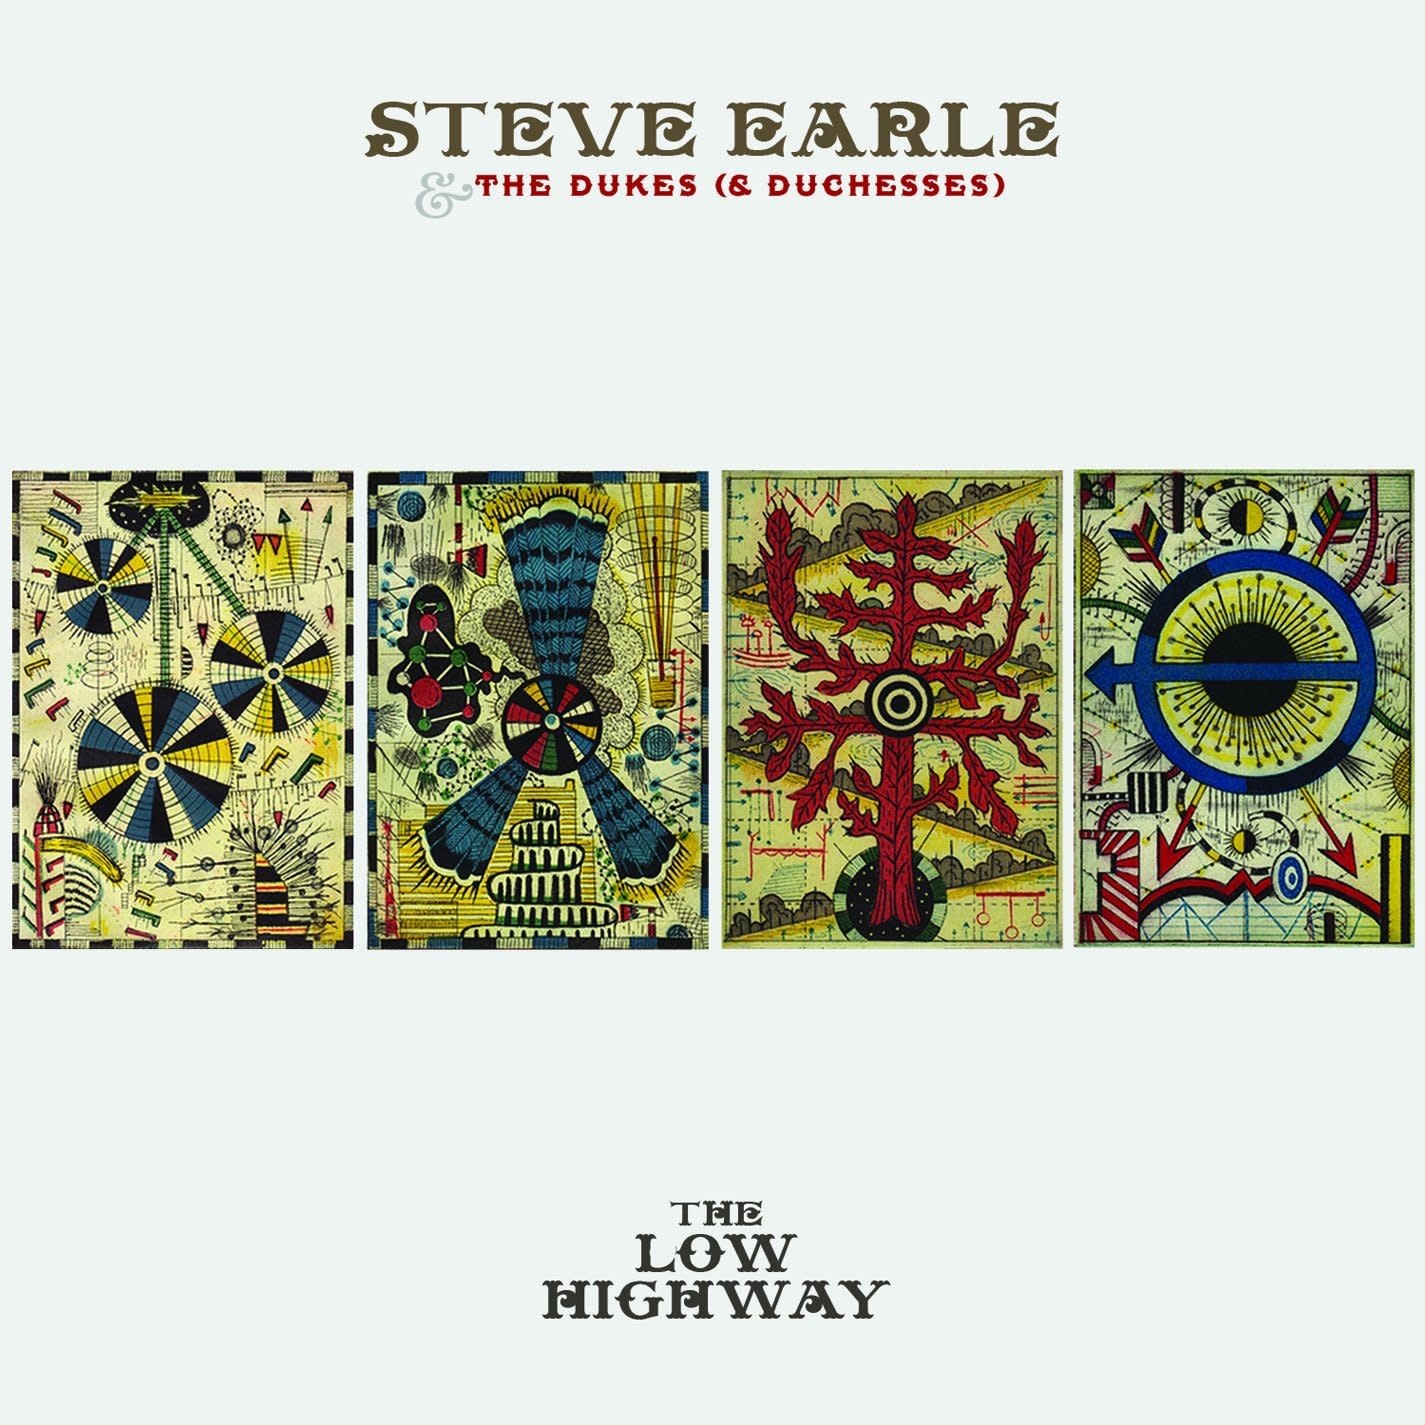 Steve Earle & The Dukes (And Duchesses) – The Low Highway